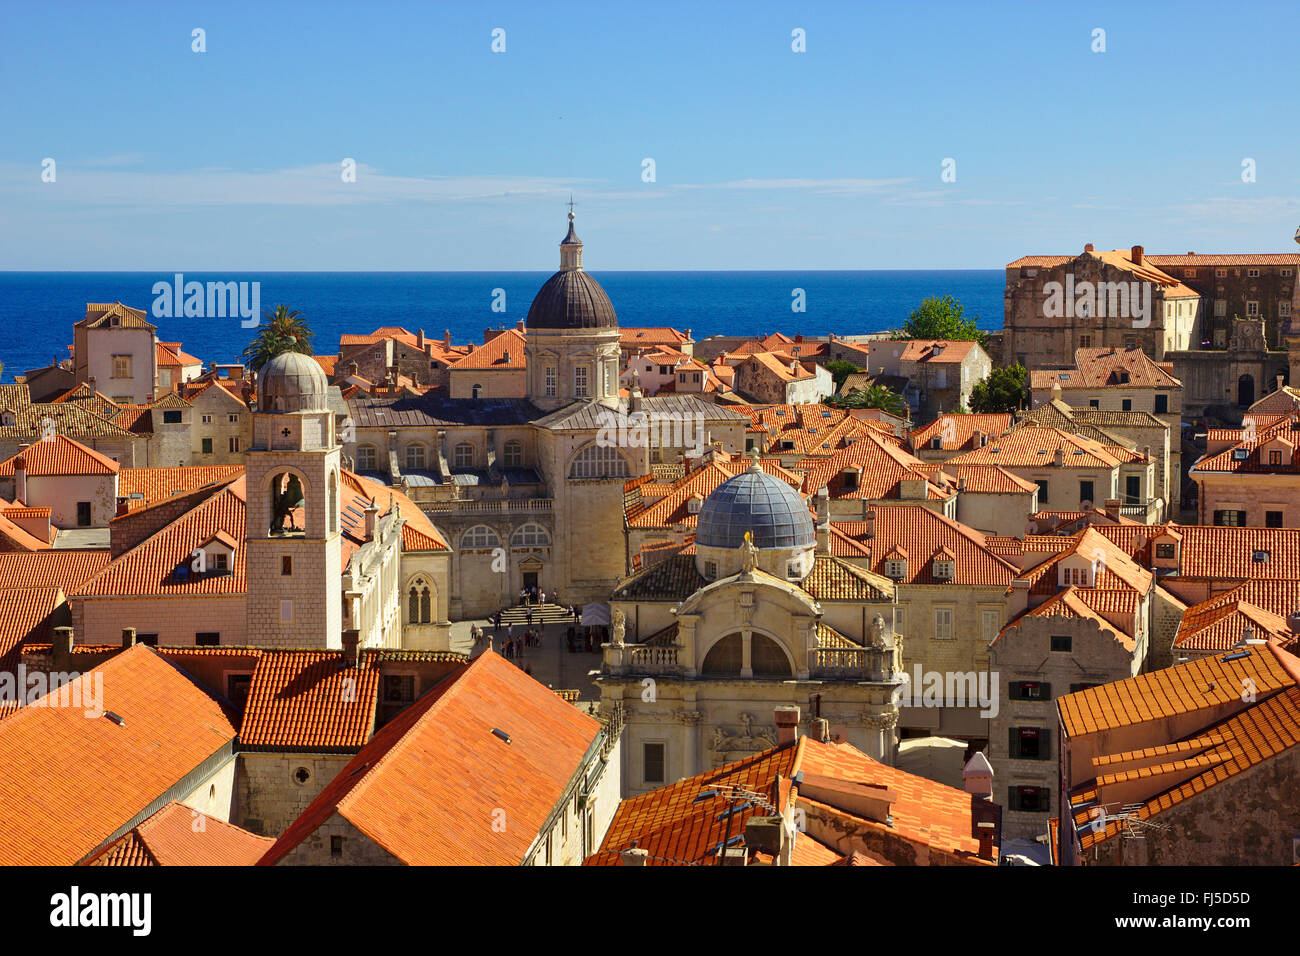 view from the city wall to the old town, Croatia, Dubrovnik Stock Photo